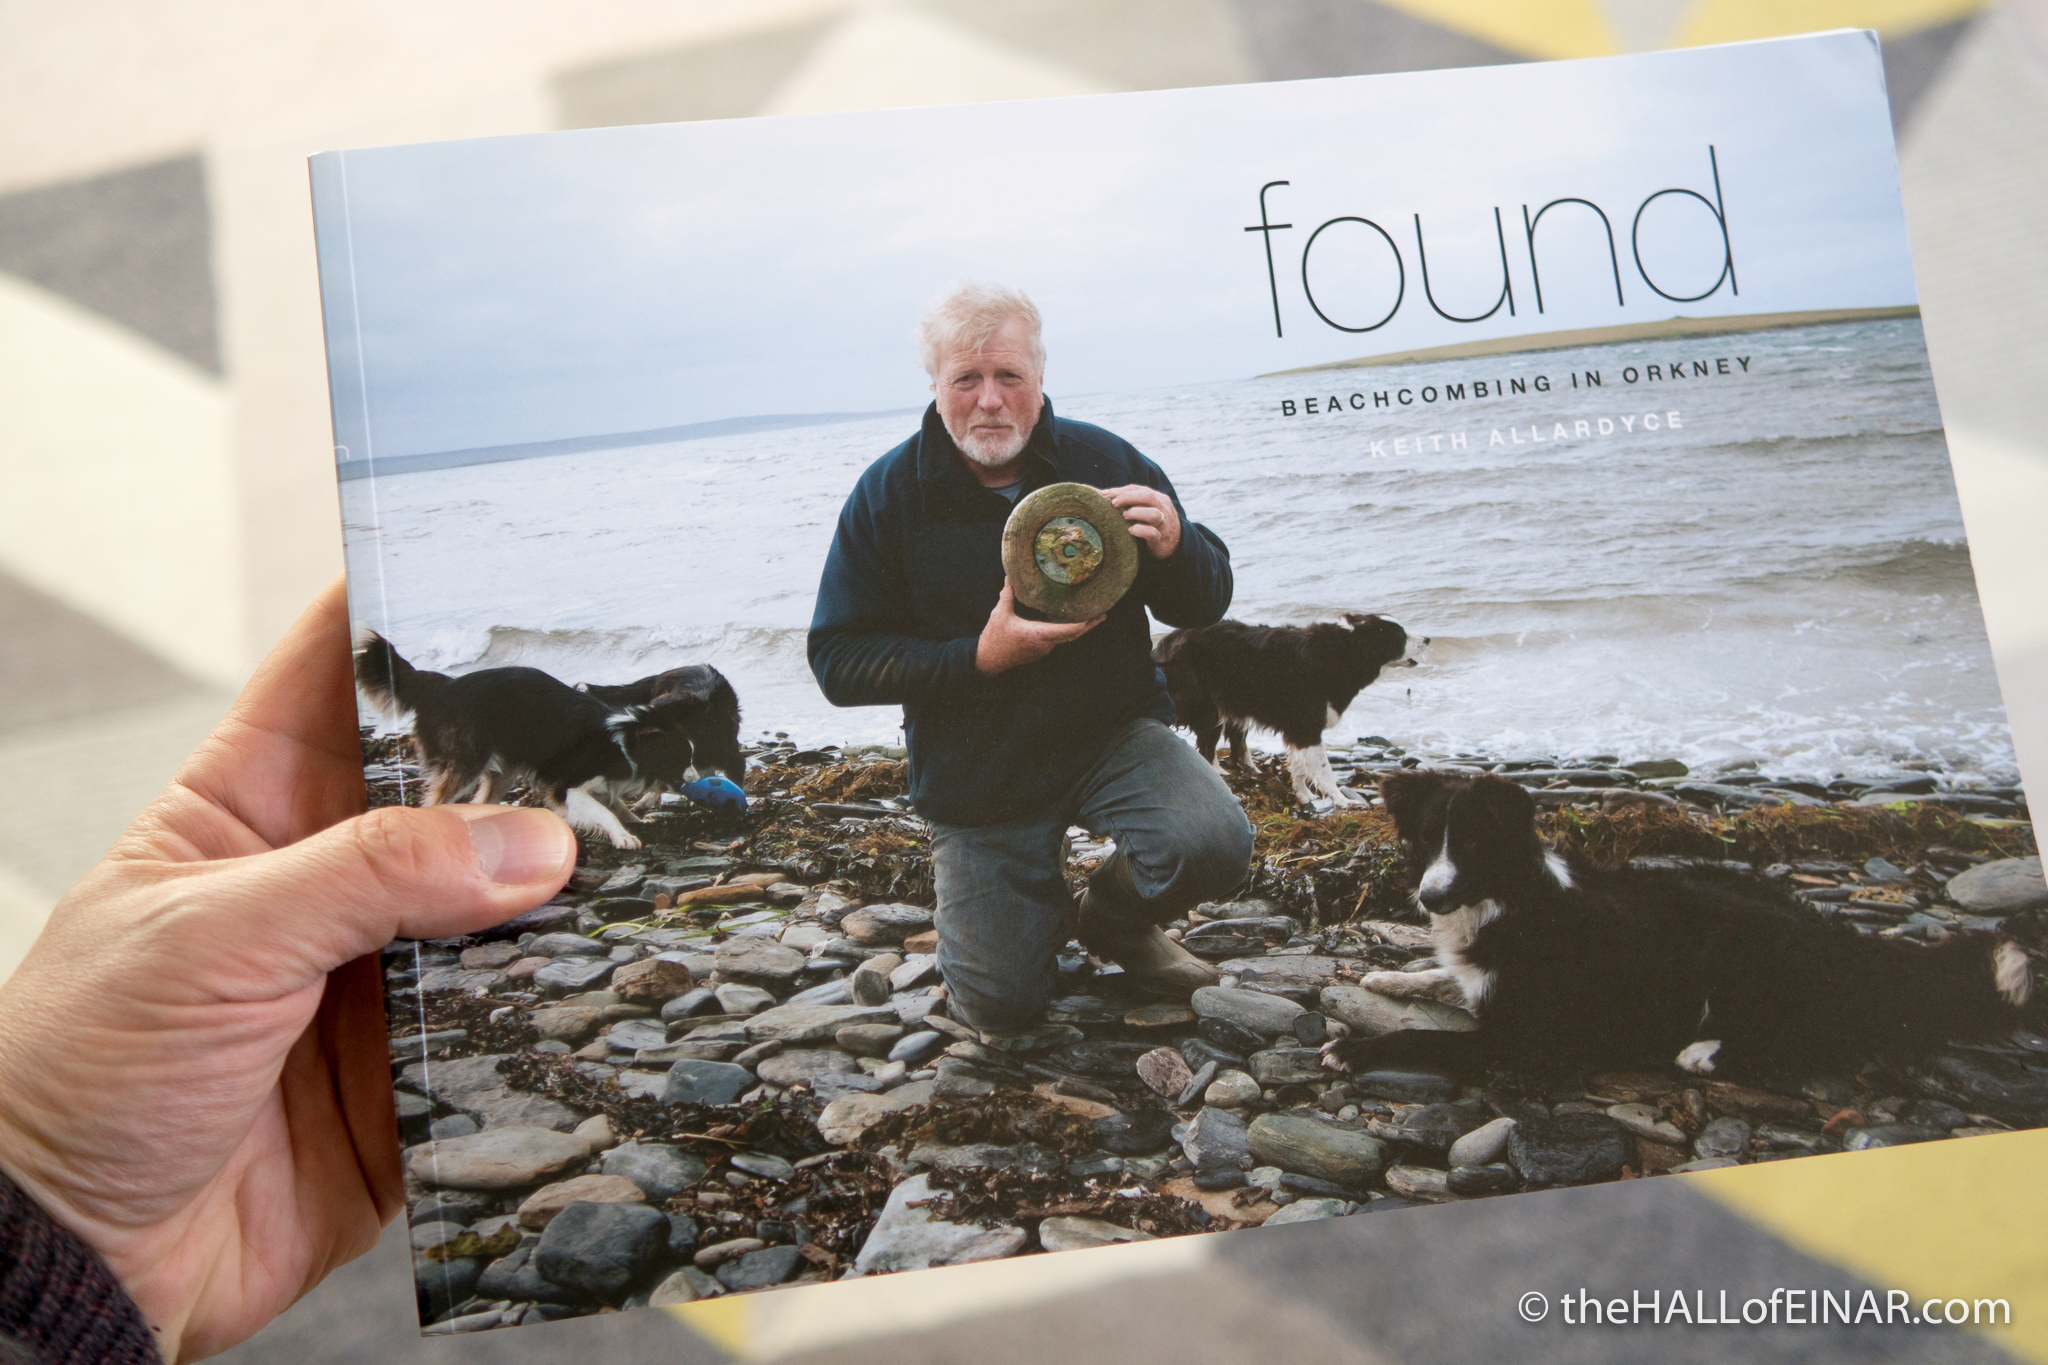 Found - Beachcombing in Orkney by Keith Allardyce - a review